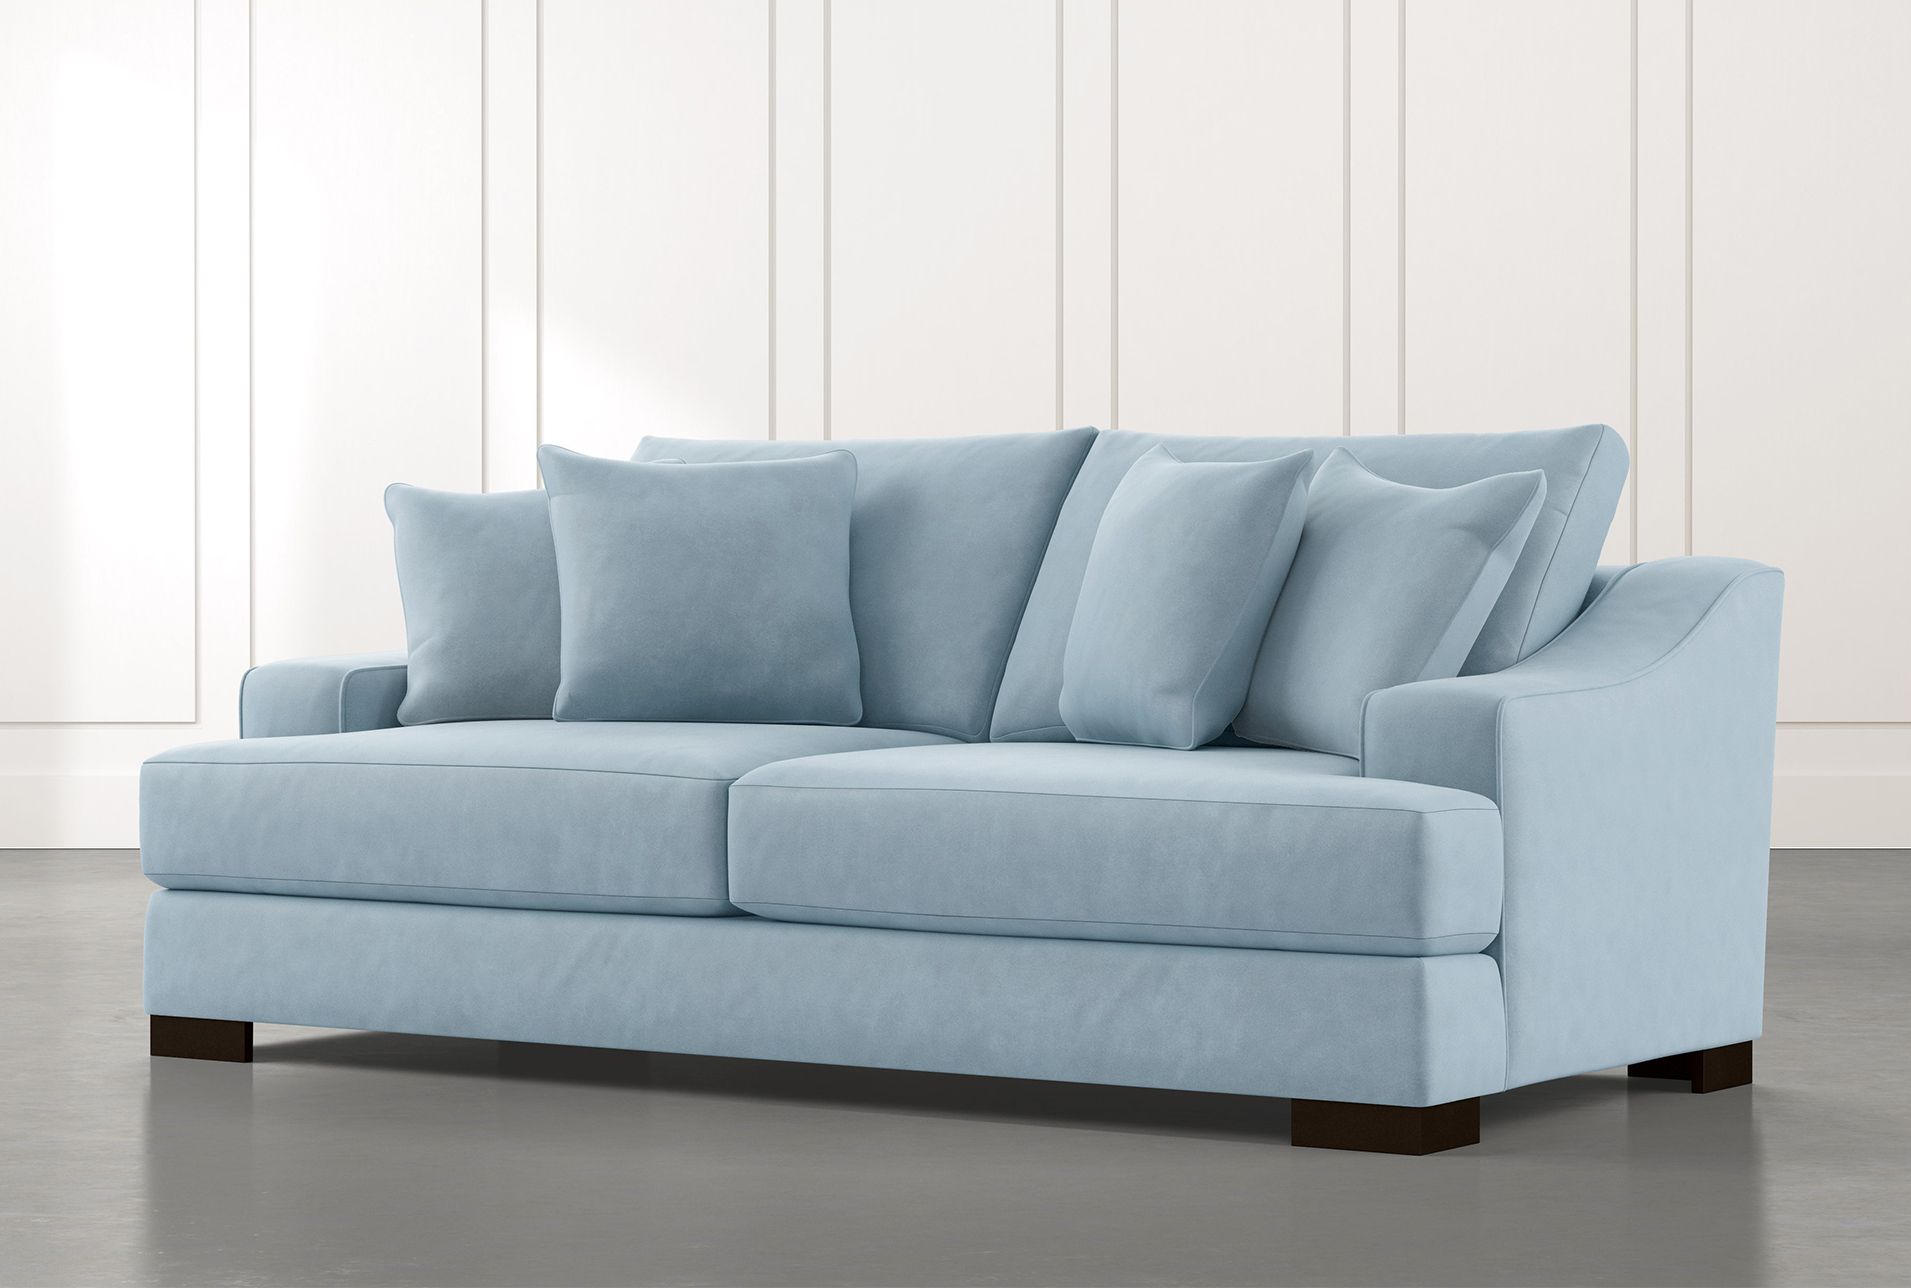 Lodge 96" Light Blue Sofa | Living Spaces With Sofas In Blue (View 18 of 20)